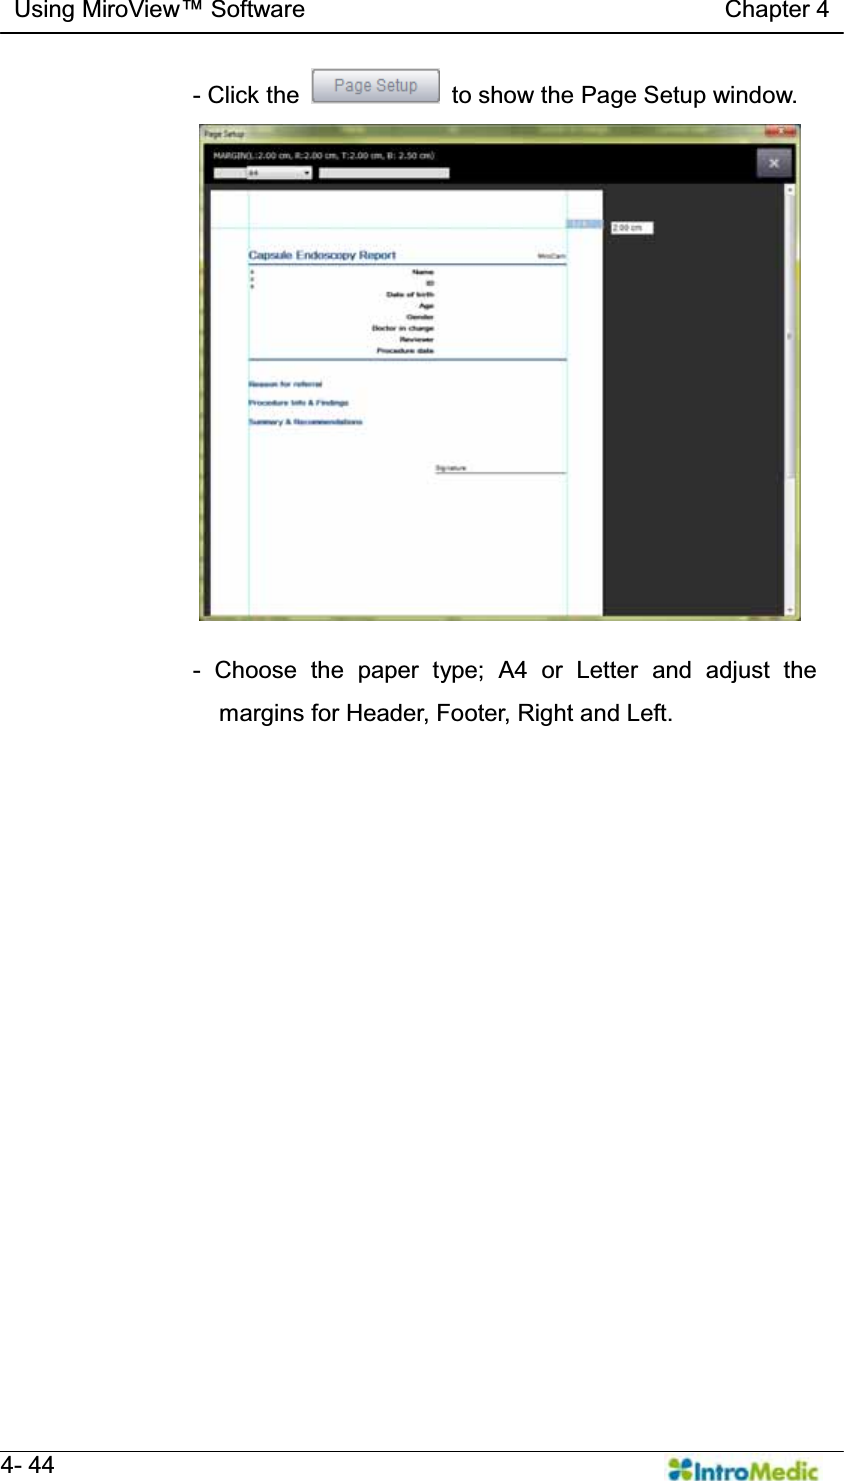   Using MiroView Software                                   Chapter 4   4- 44 - Click the    to show the Page Setup window.  - Choose the paper type; A4 or Letter and adjust the margins for Header, Footer, Right and Left.  